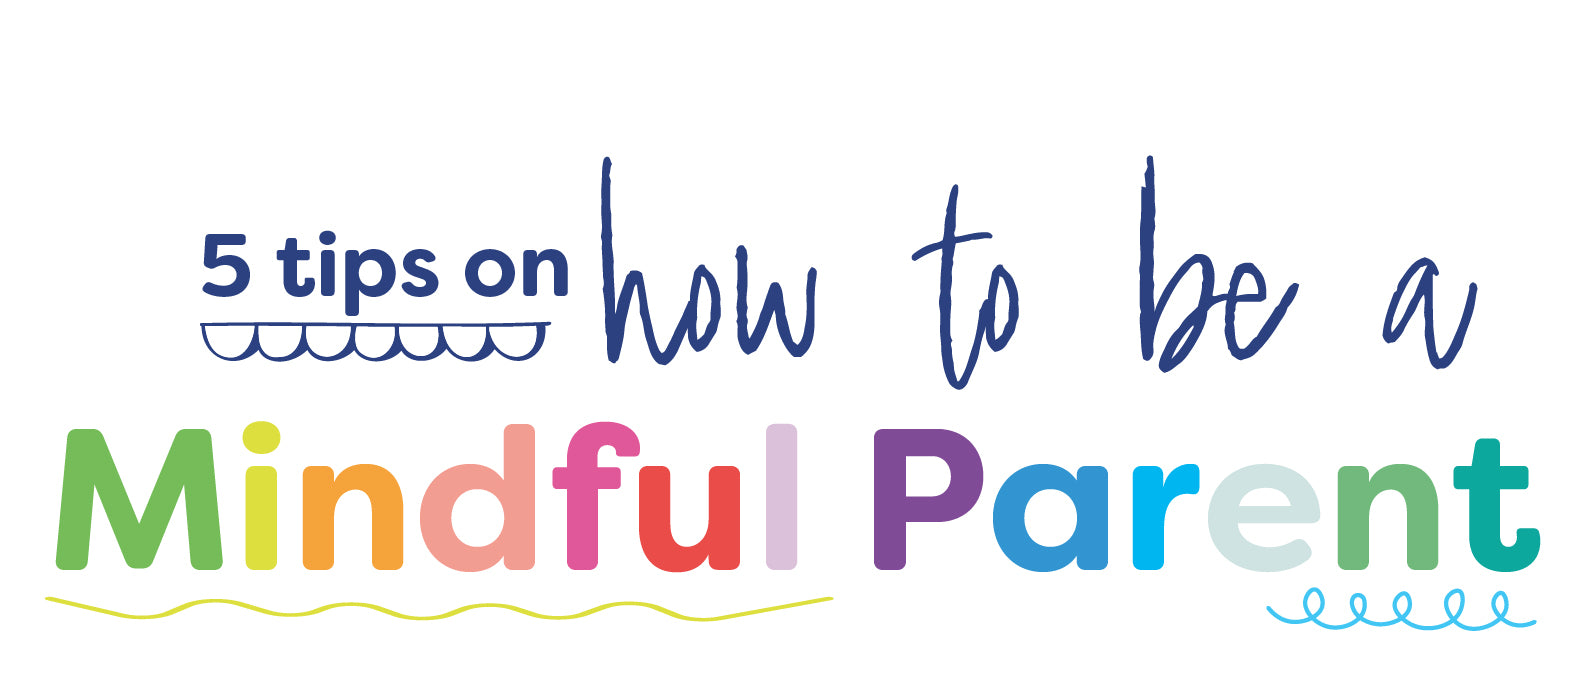 Mindful Parenting: 5 Tips for Staying Present in Everyday Moments